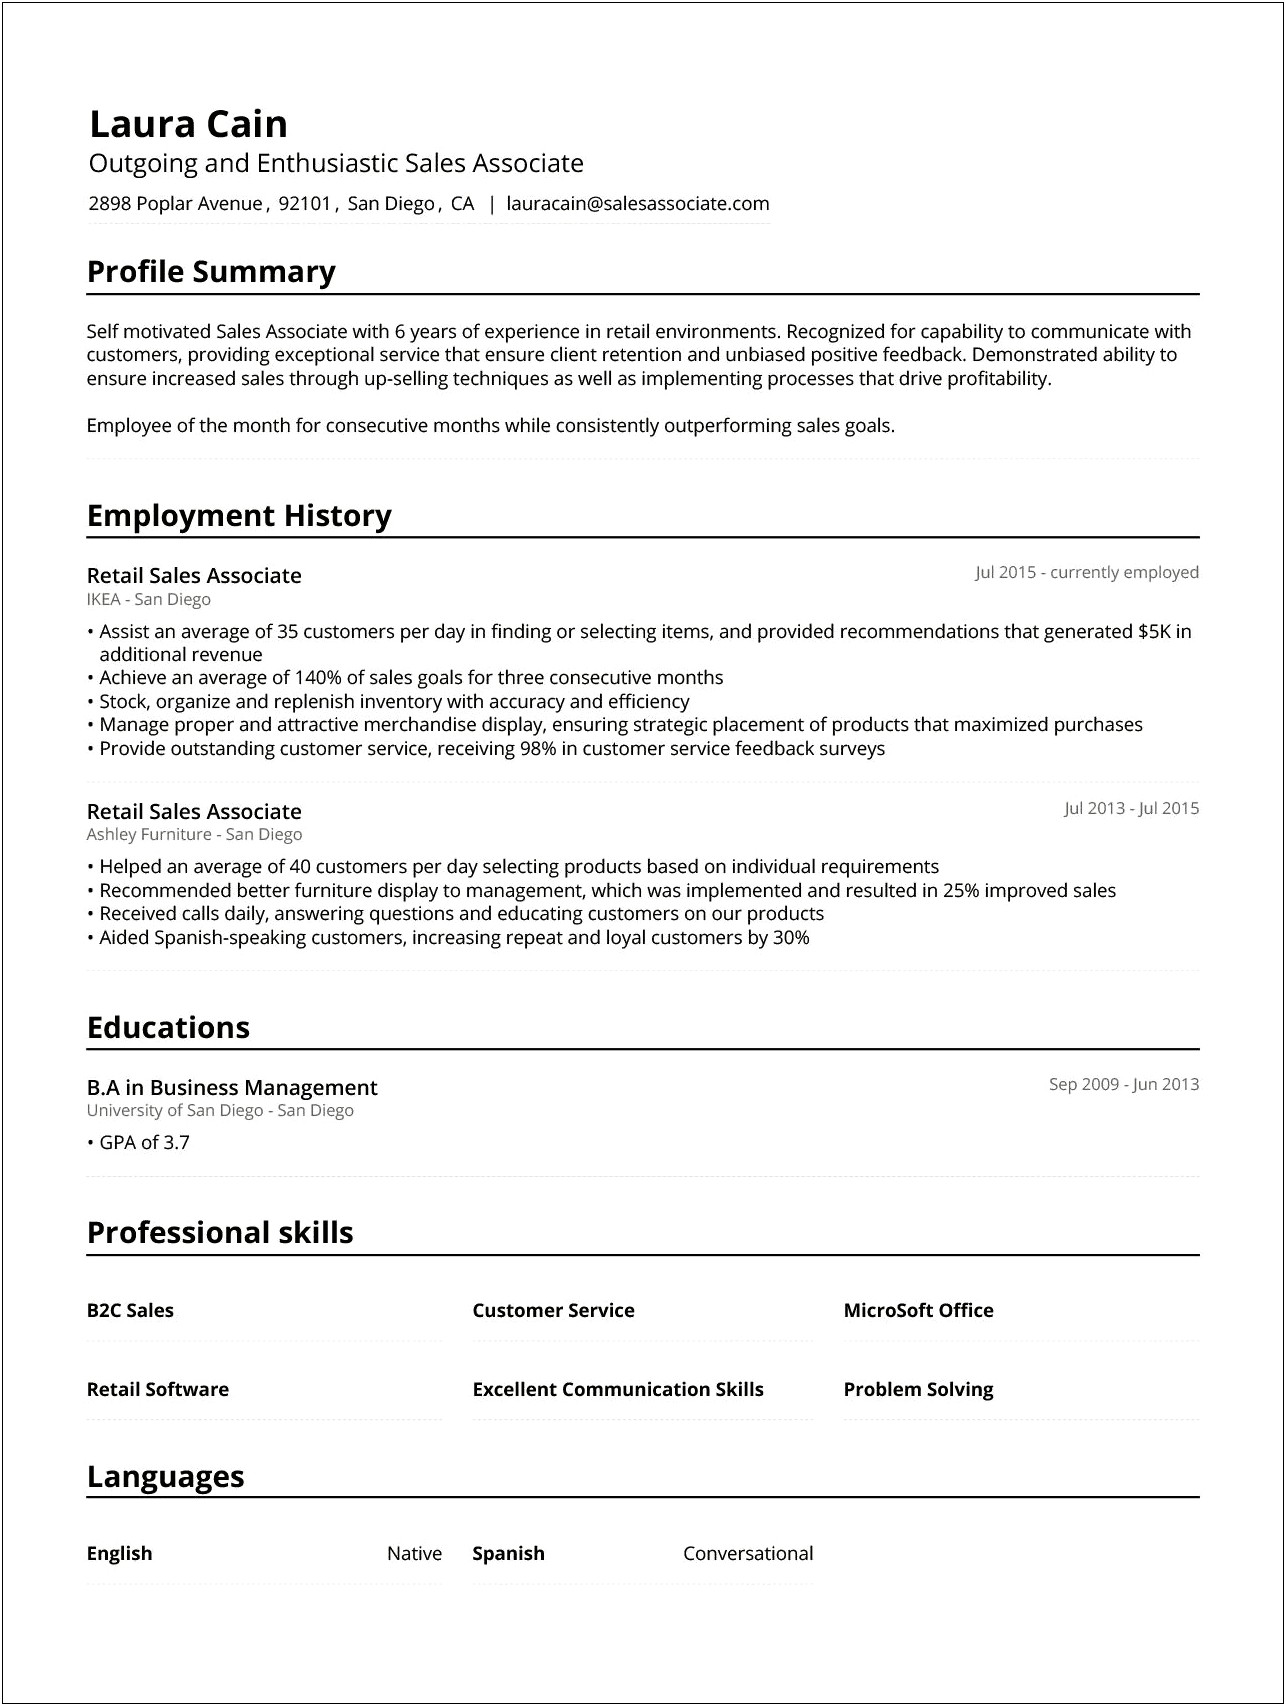 Special Skills For Sales Associate Resume